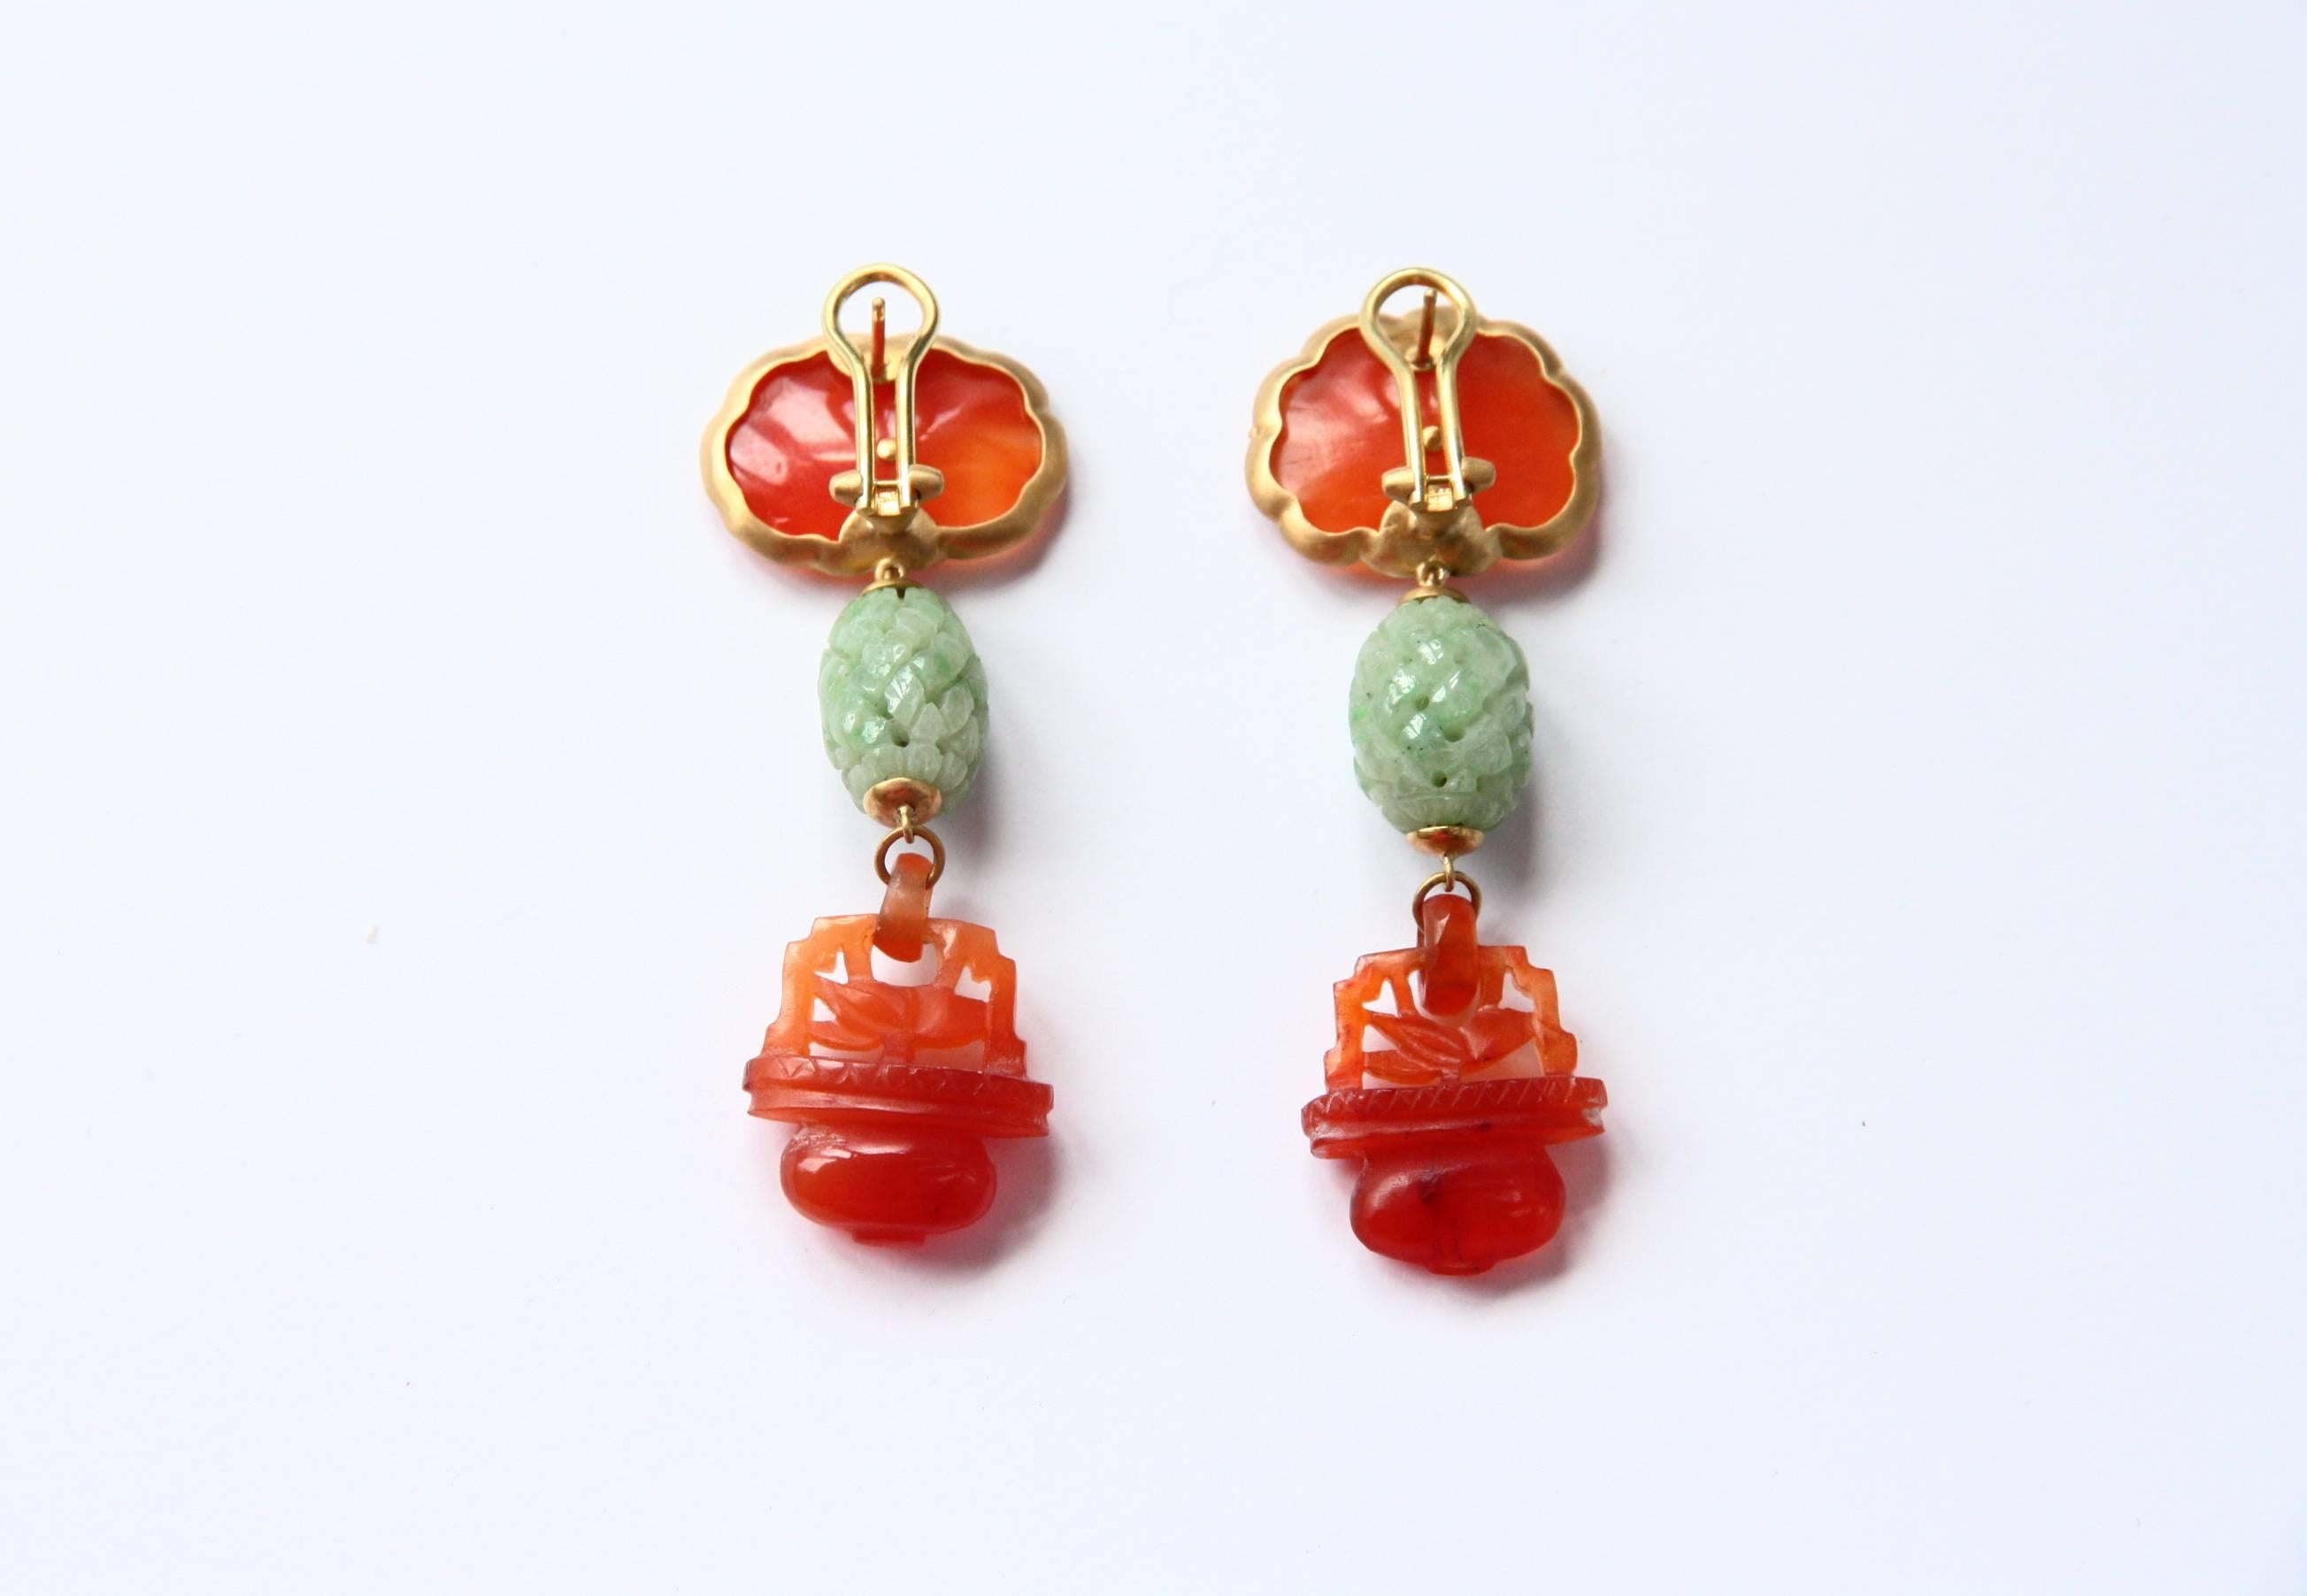 Very special earrings made in antiques jade and carnelian cts 11, basket are carved in one pieces and the top is a lotus flower.
Linket in 18kt brushed gold gr9,70. total length is 7cm
All Giulia Colussi jewelry is new and has never been previously